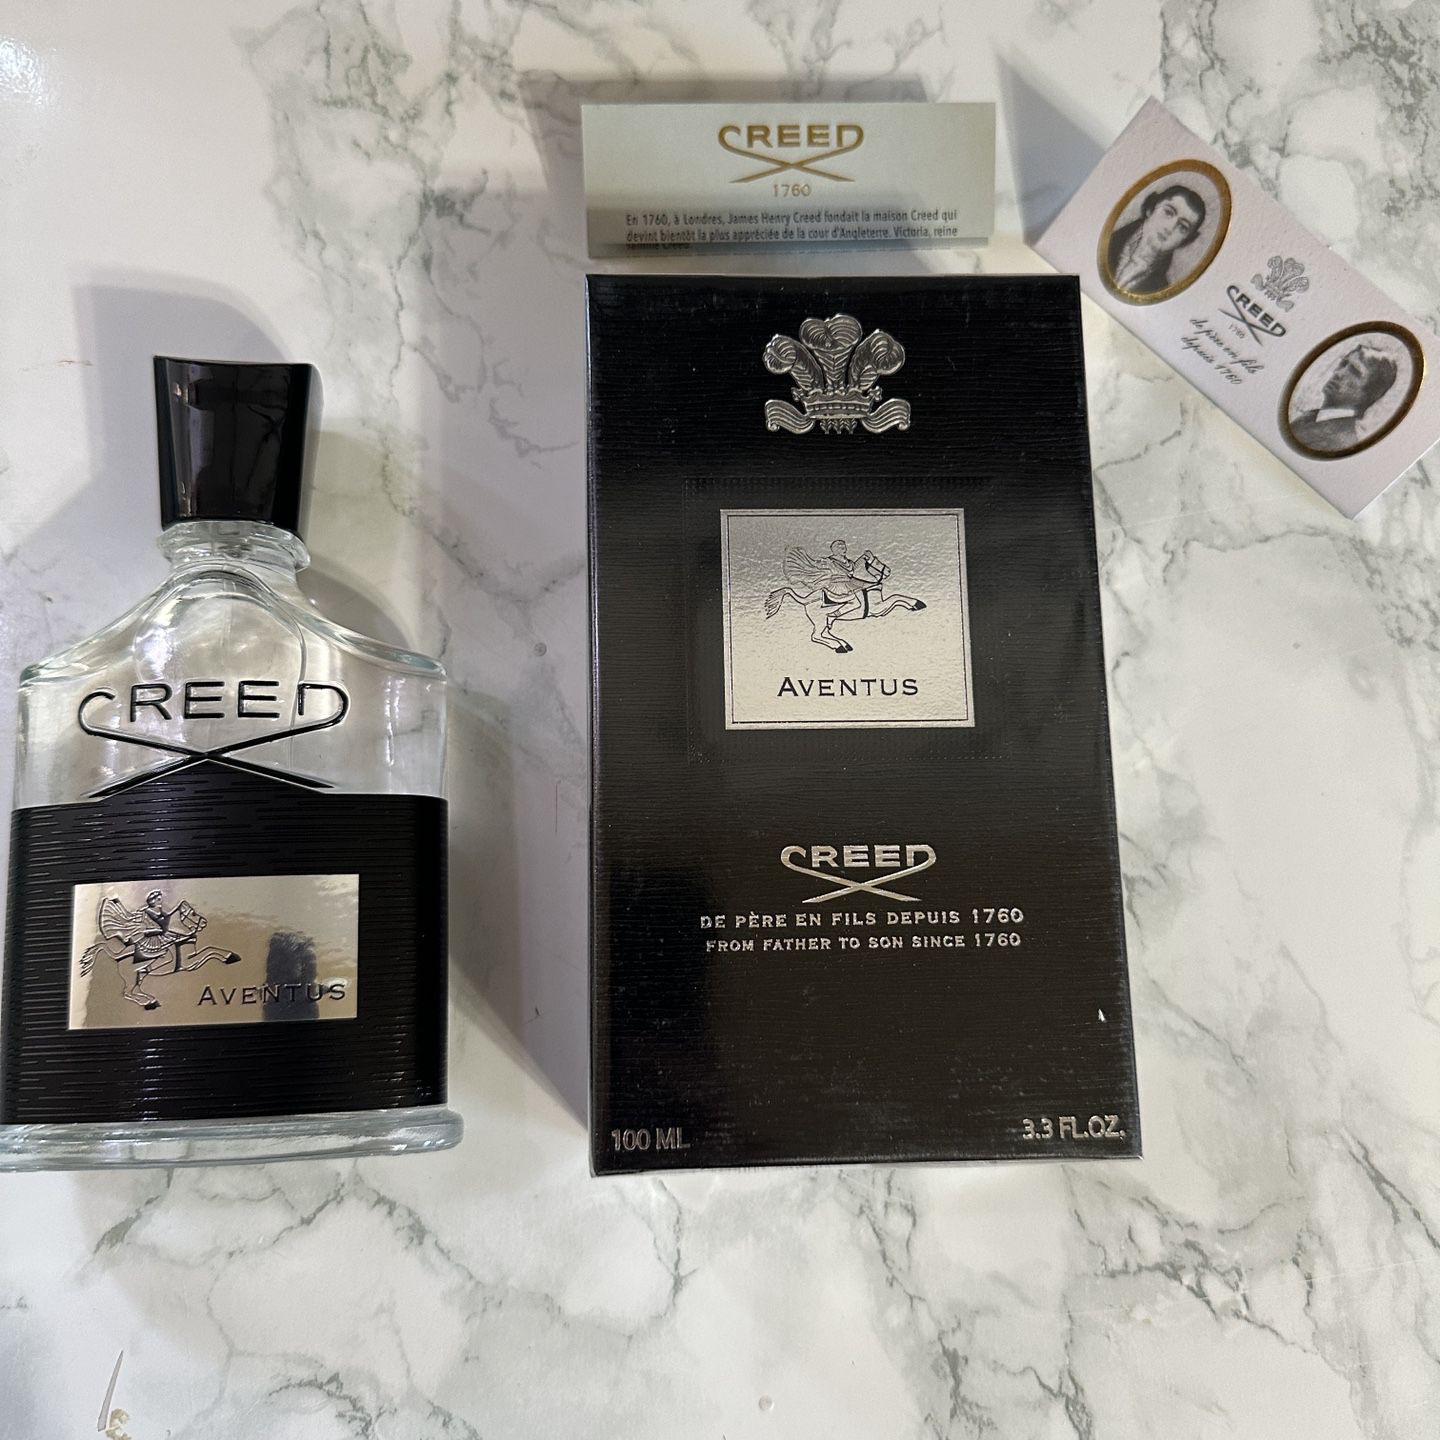 Creed Aventus Cologne 100ml Bottle